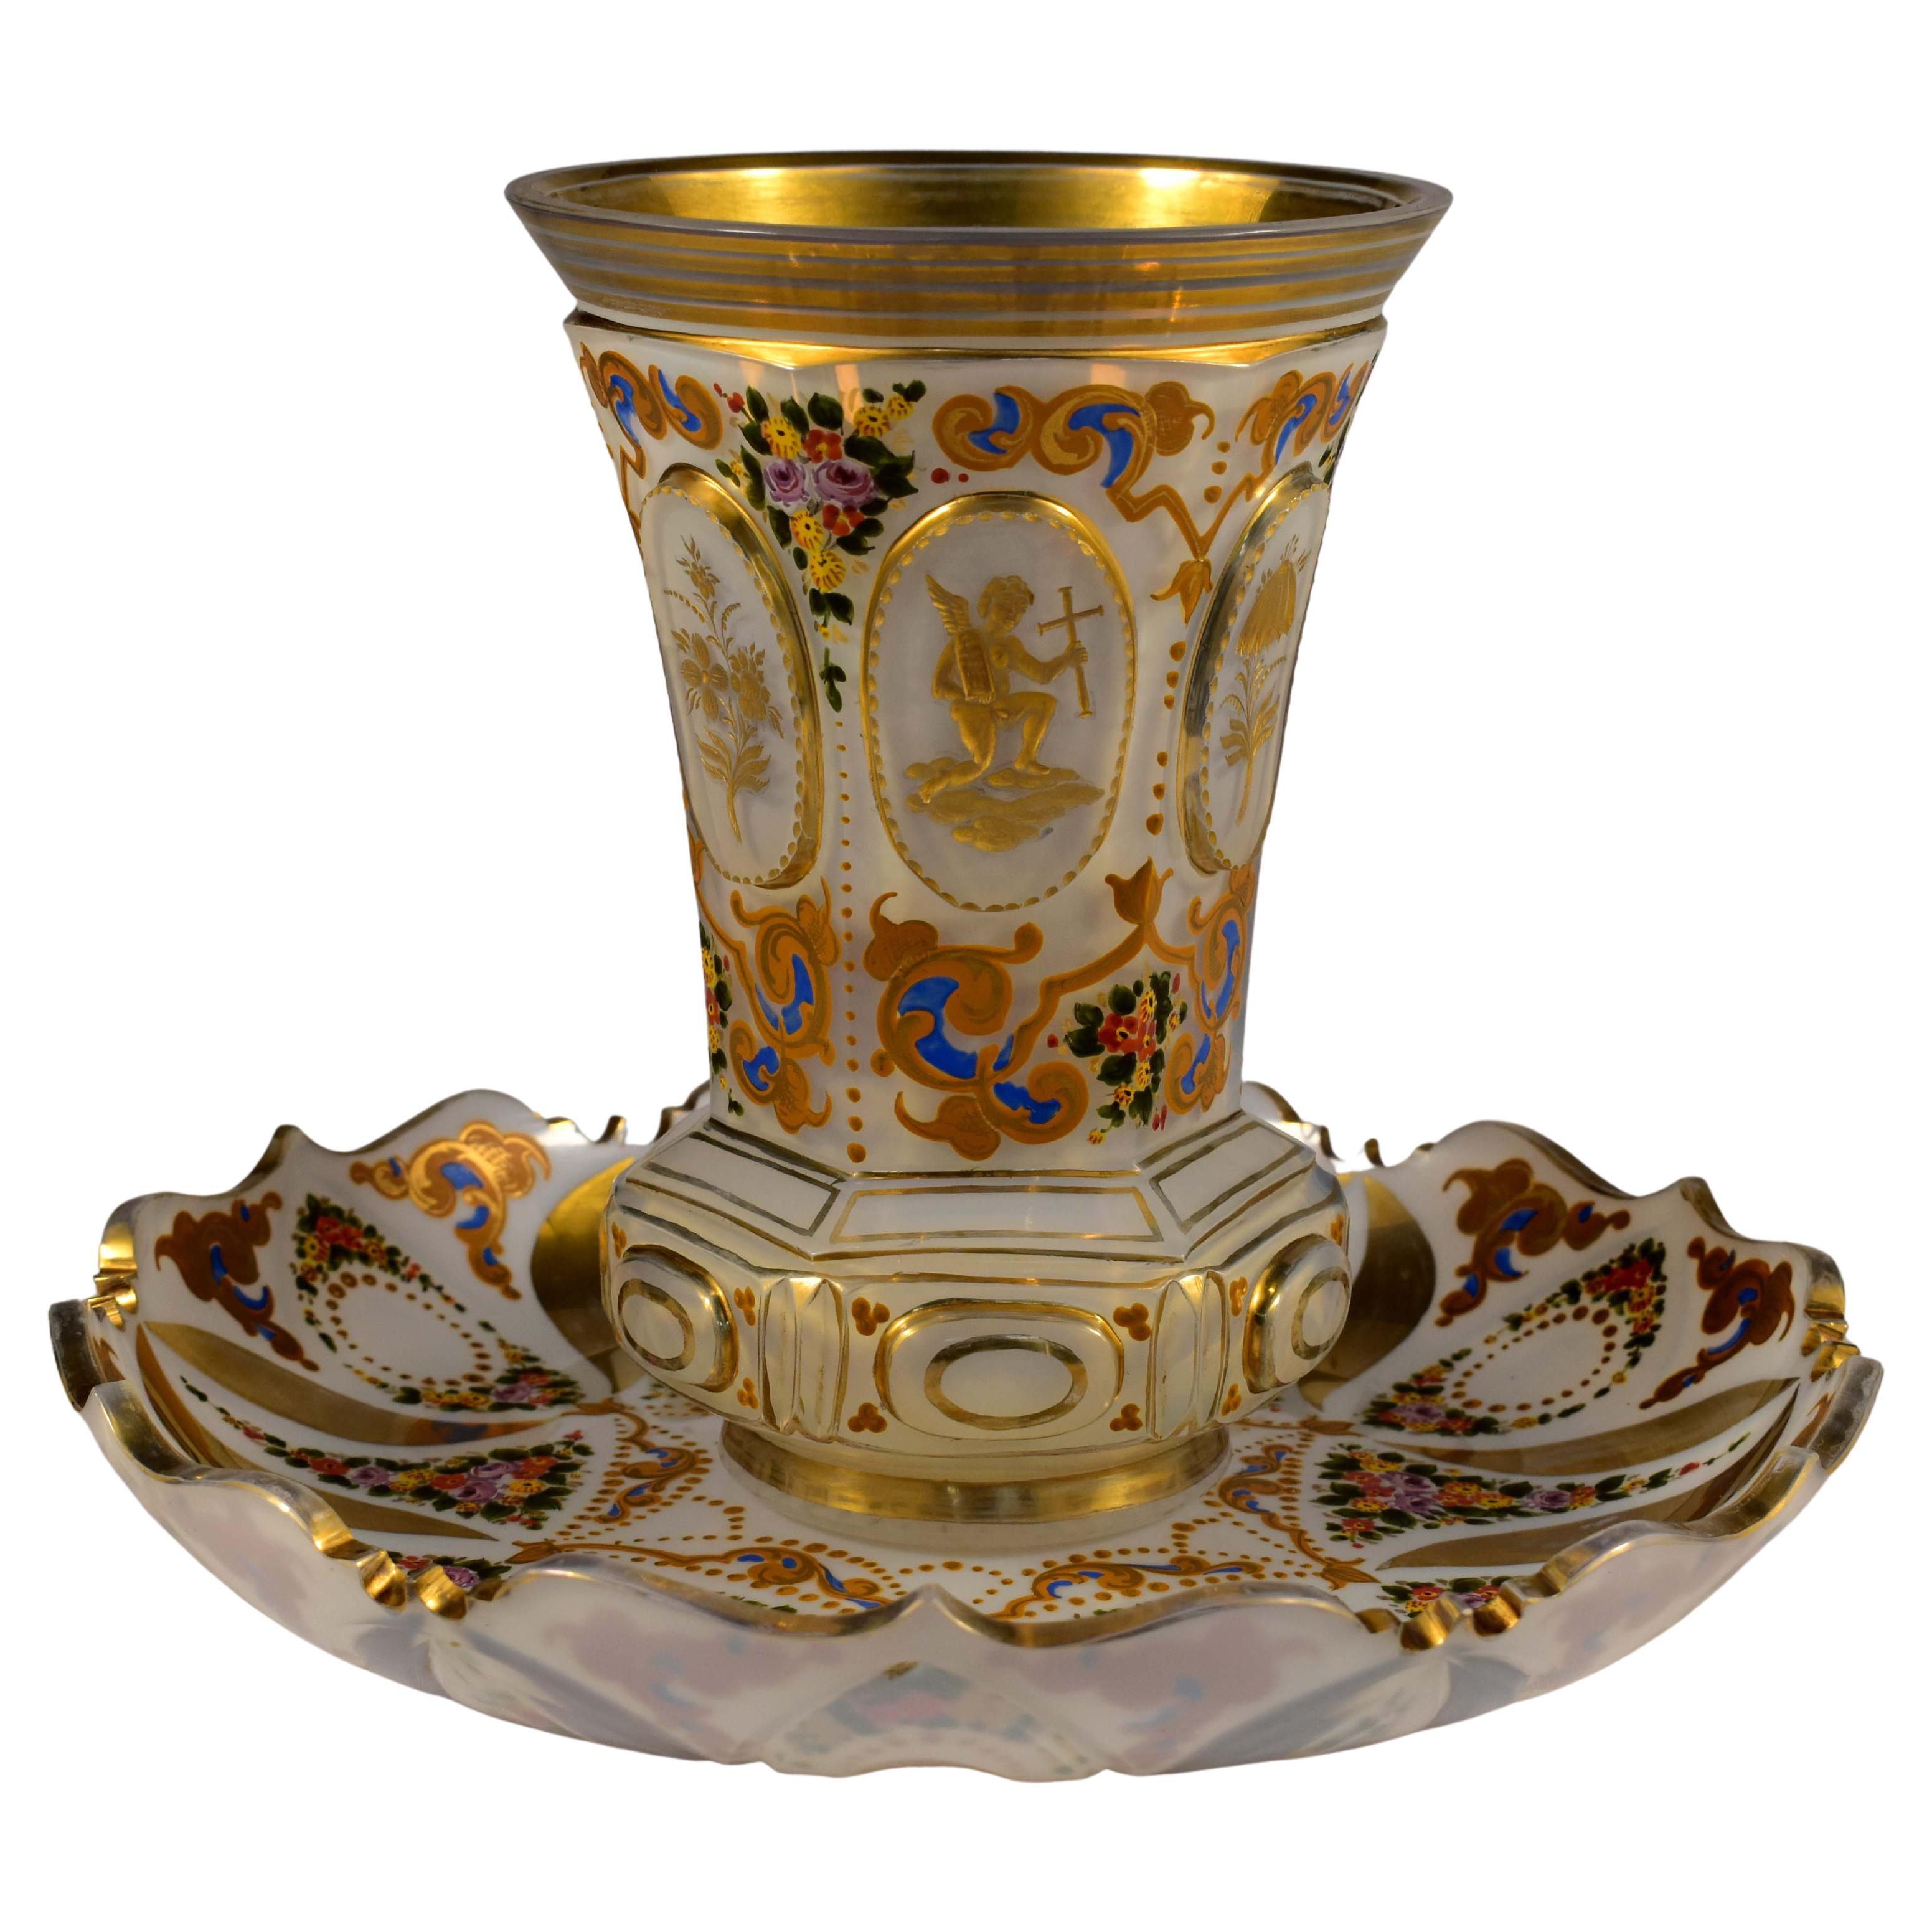 Antique Opaline Goblet with a Plate, Bohemian Glass 19th Century, Simbolisns